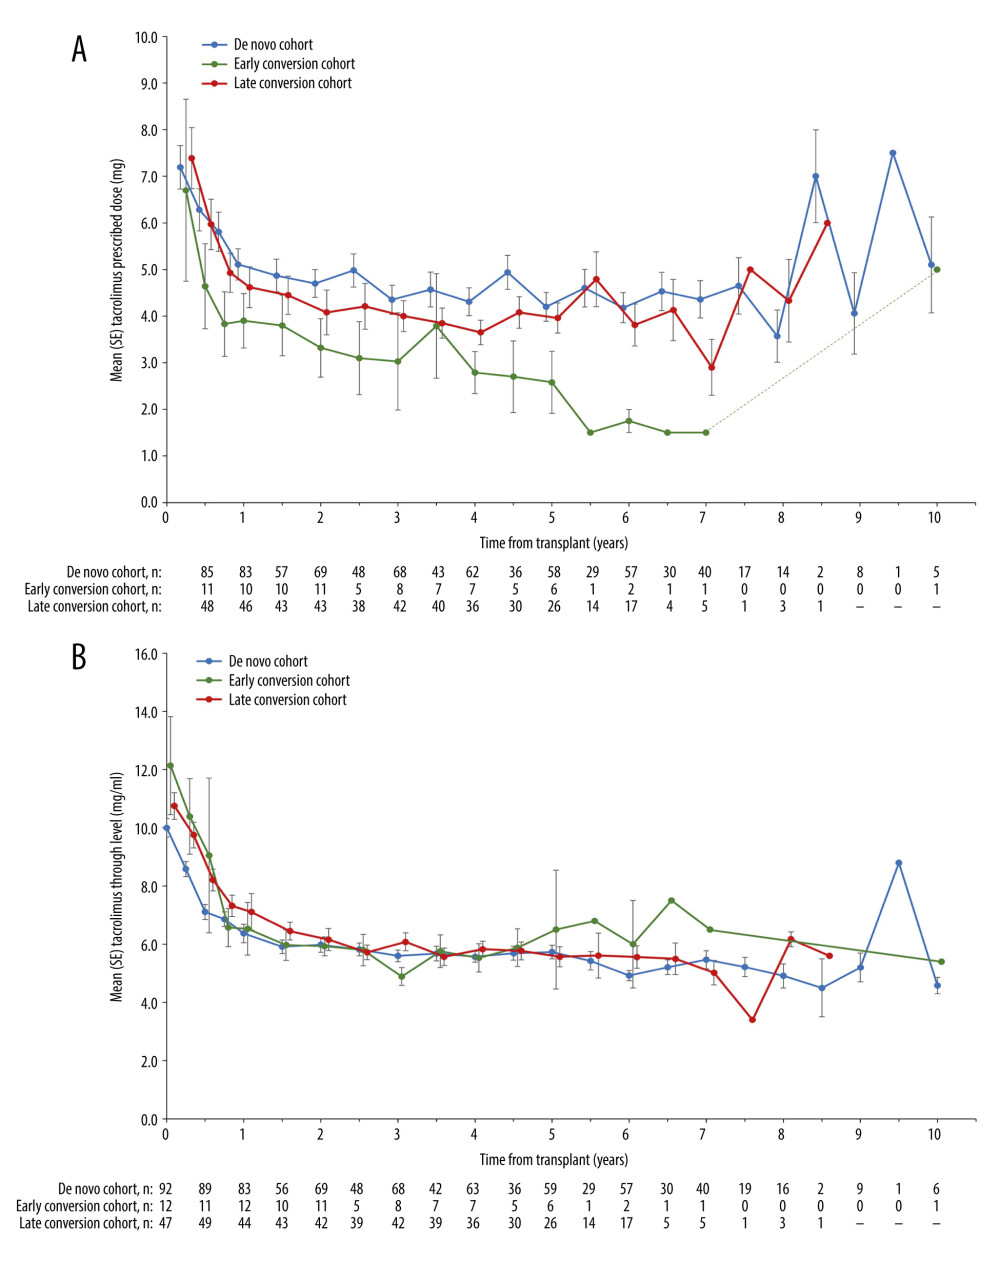 (A) Mean prescribed tacrolimus dosages from time of transplant, stratified by de novo, early- and late-conversion cohorts. Error bars denote standard error. (B) Mean tacrolimus trough levels from time of transplant, stratified by de novo, early- and late-conversion cohorts. Error bars denote standard error.